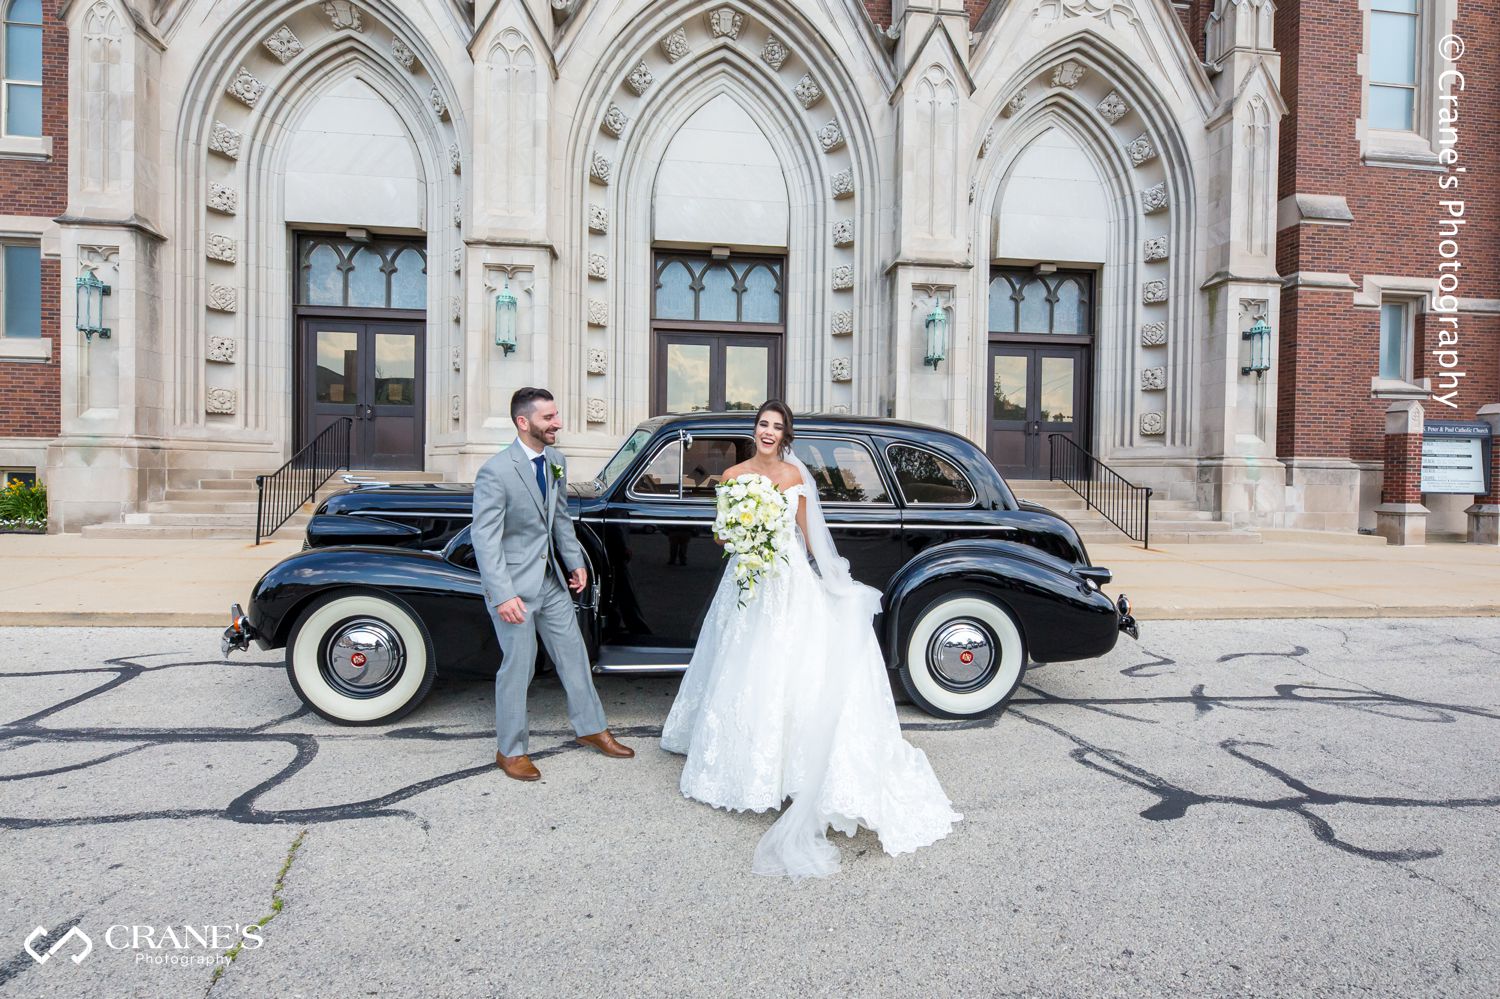 A fun moment between a bride and groom in front of St. Peter and Paul Church in Naperville